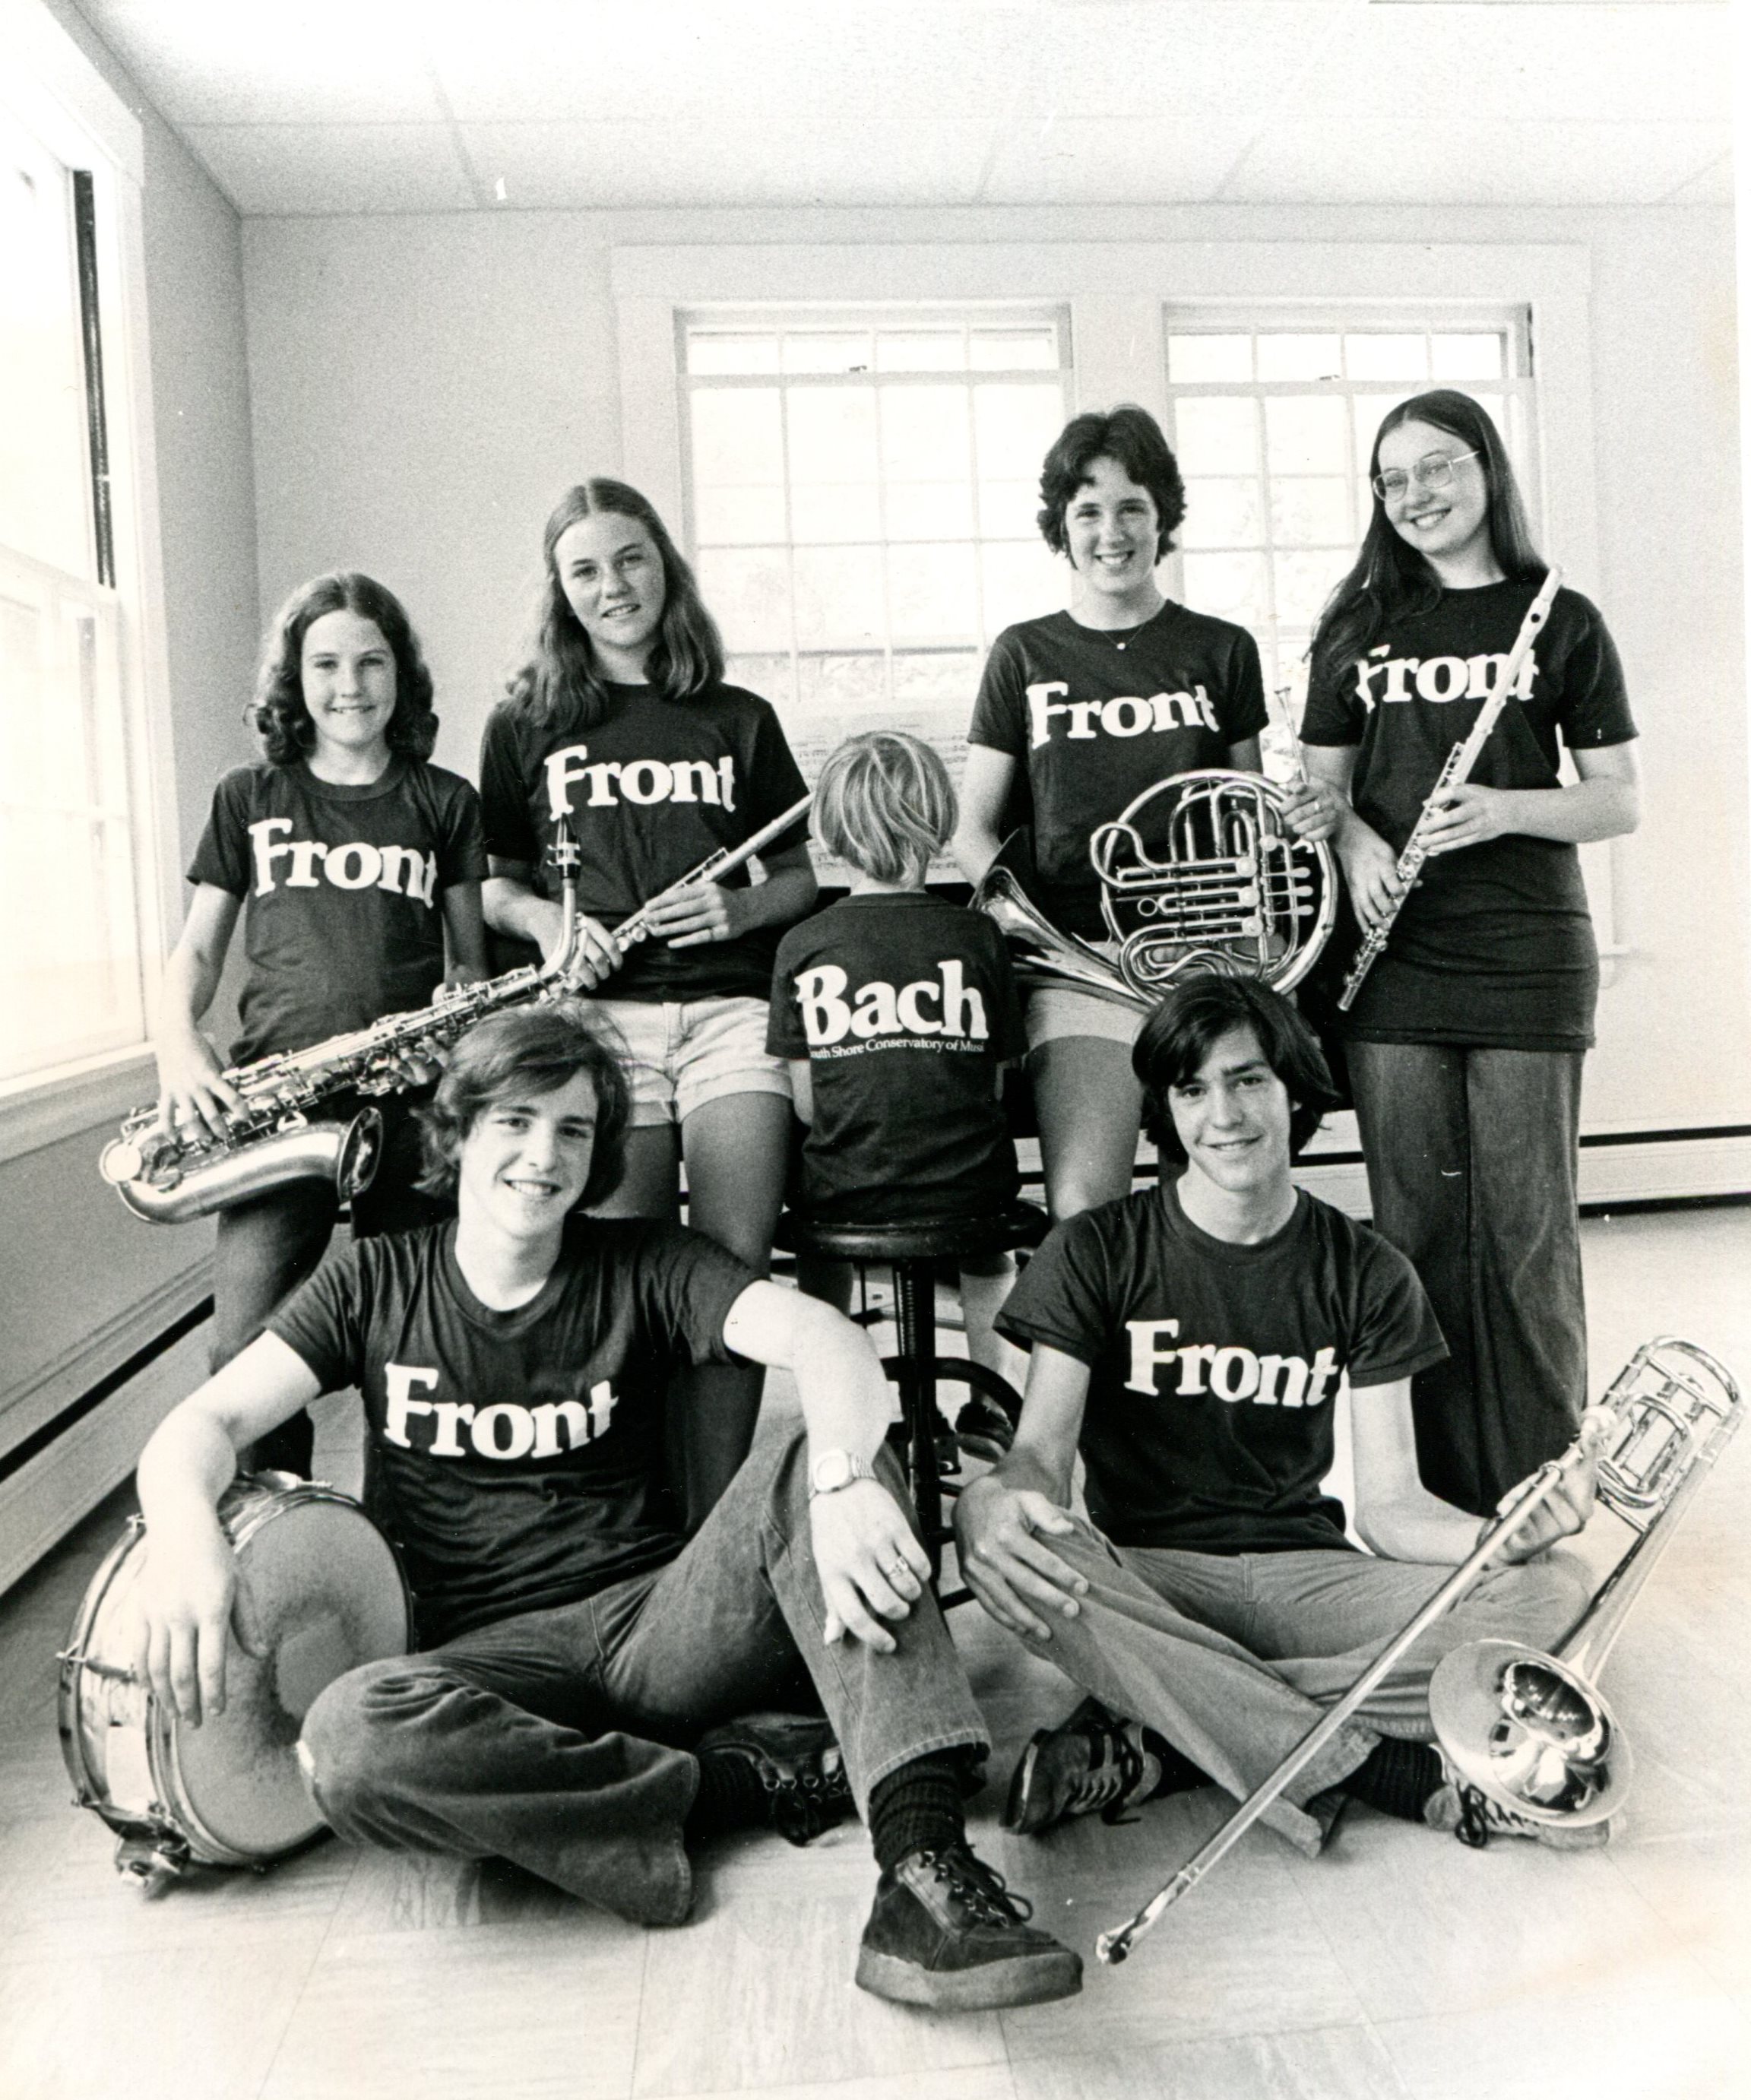 Vintage SSC photo with students wearing shirts that say Front and Bach.